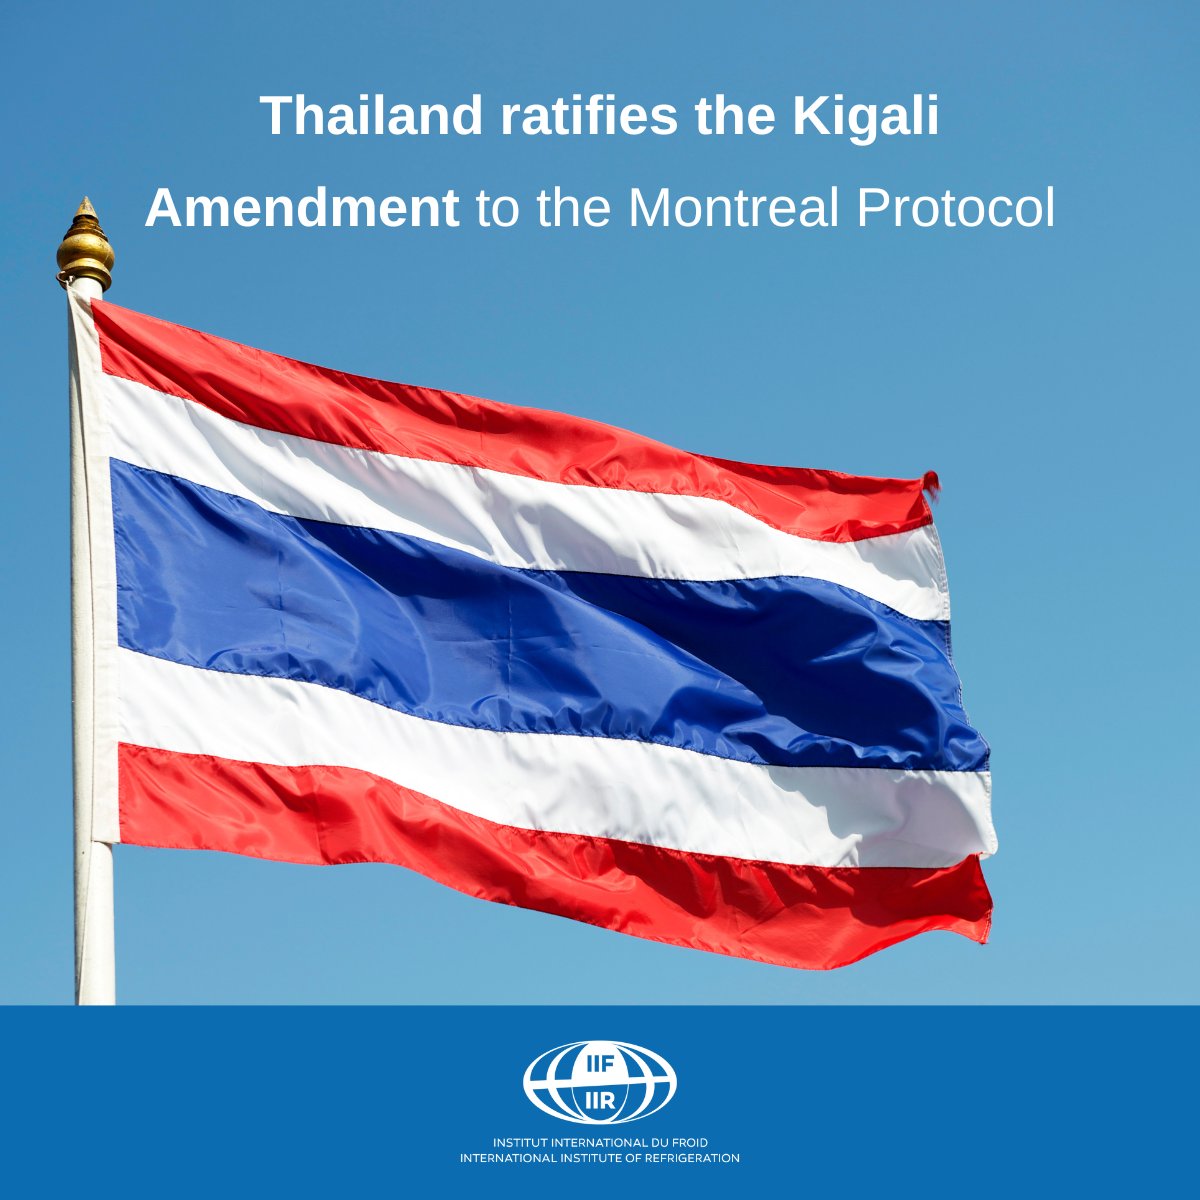 Great news! Thailand joins the fight against climate change by ratifying the Kigali Amendment. 🍃 By committing to reduce HFC emissions, Thailand is taking a crucial step towards a sustainable future. Learn more here 👉 bit.ly/4aPeR8j #ClimateAction #KigaliAmendment